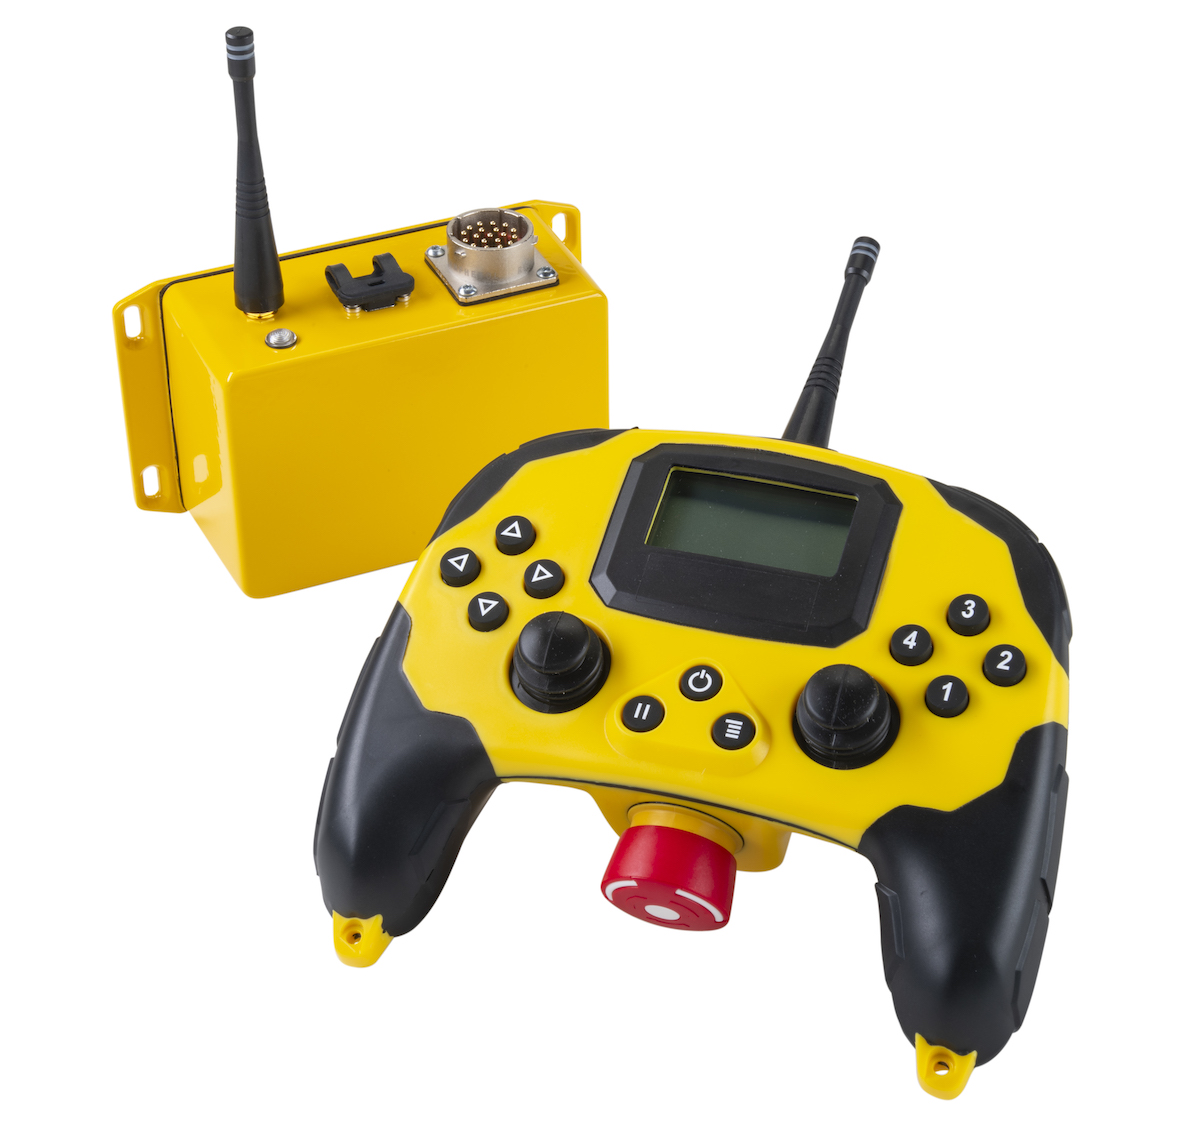 FORT’s Safety Remote Control and its Vehicle Safety Control.